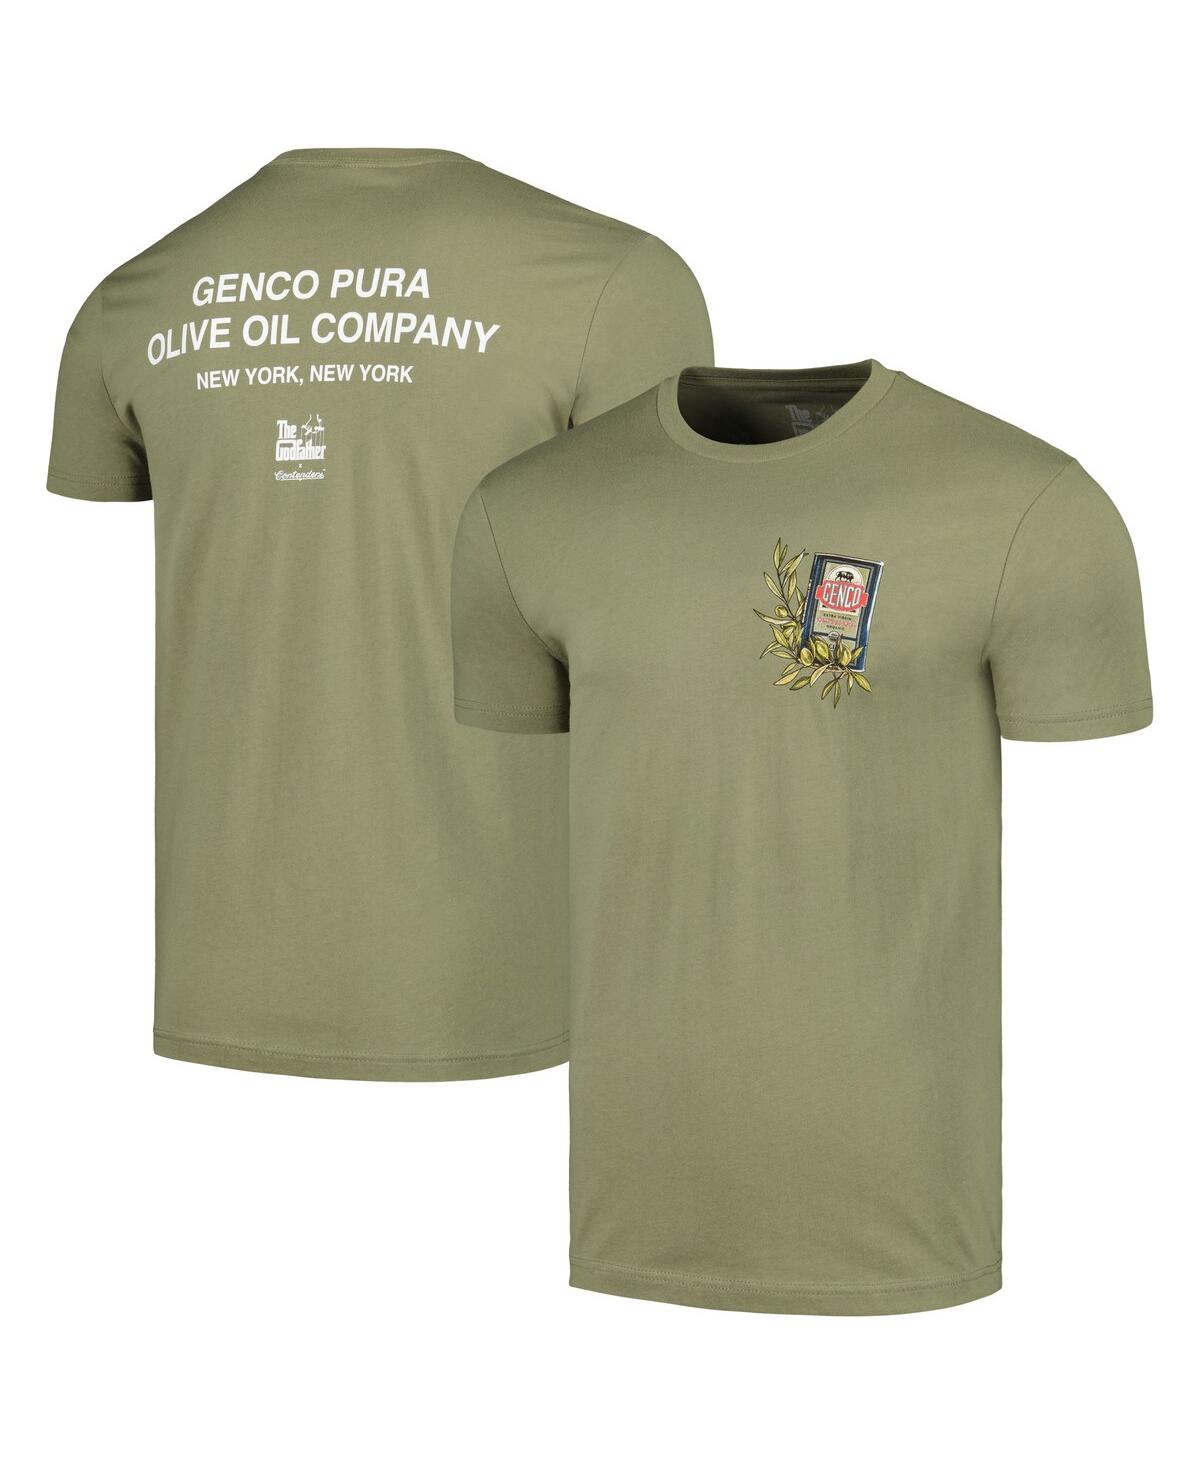 Contenders Clothing Men's  Olive The Godfather Genco Pura Olive Oil T-shirt